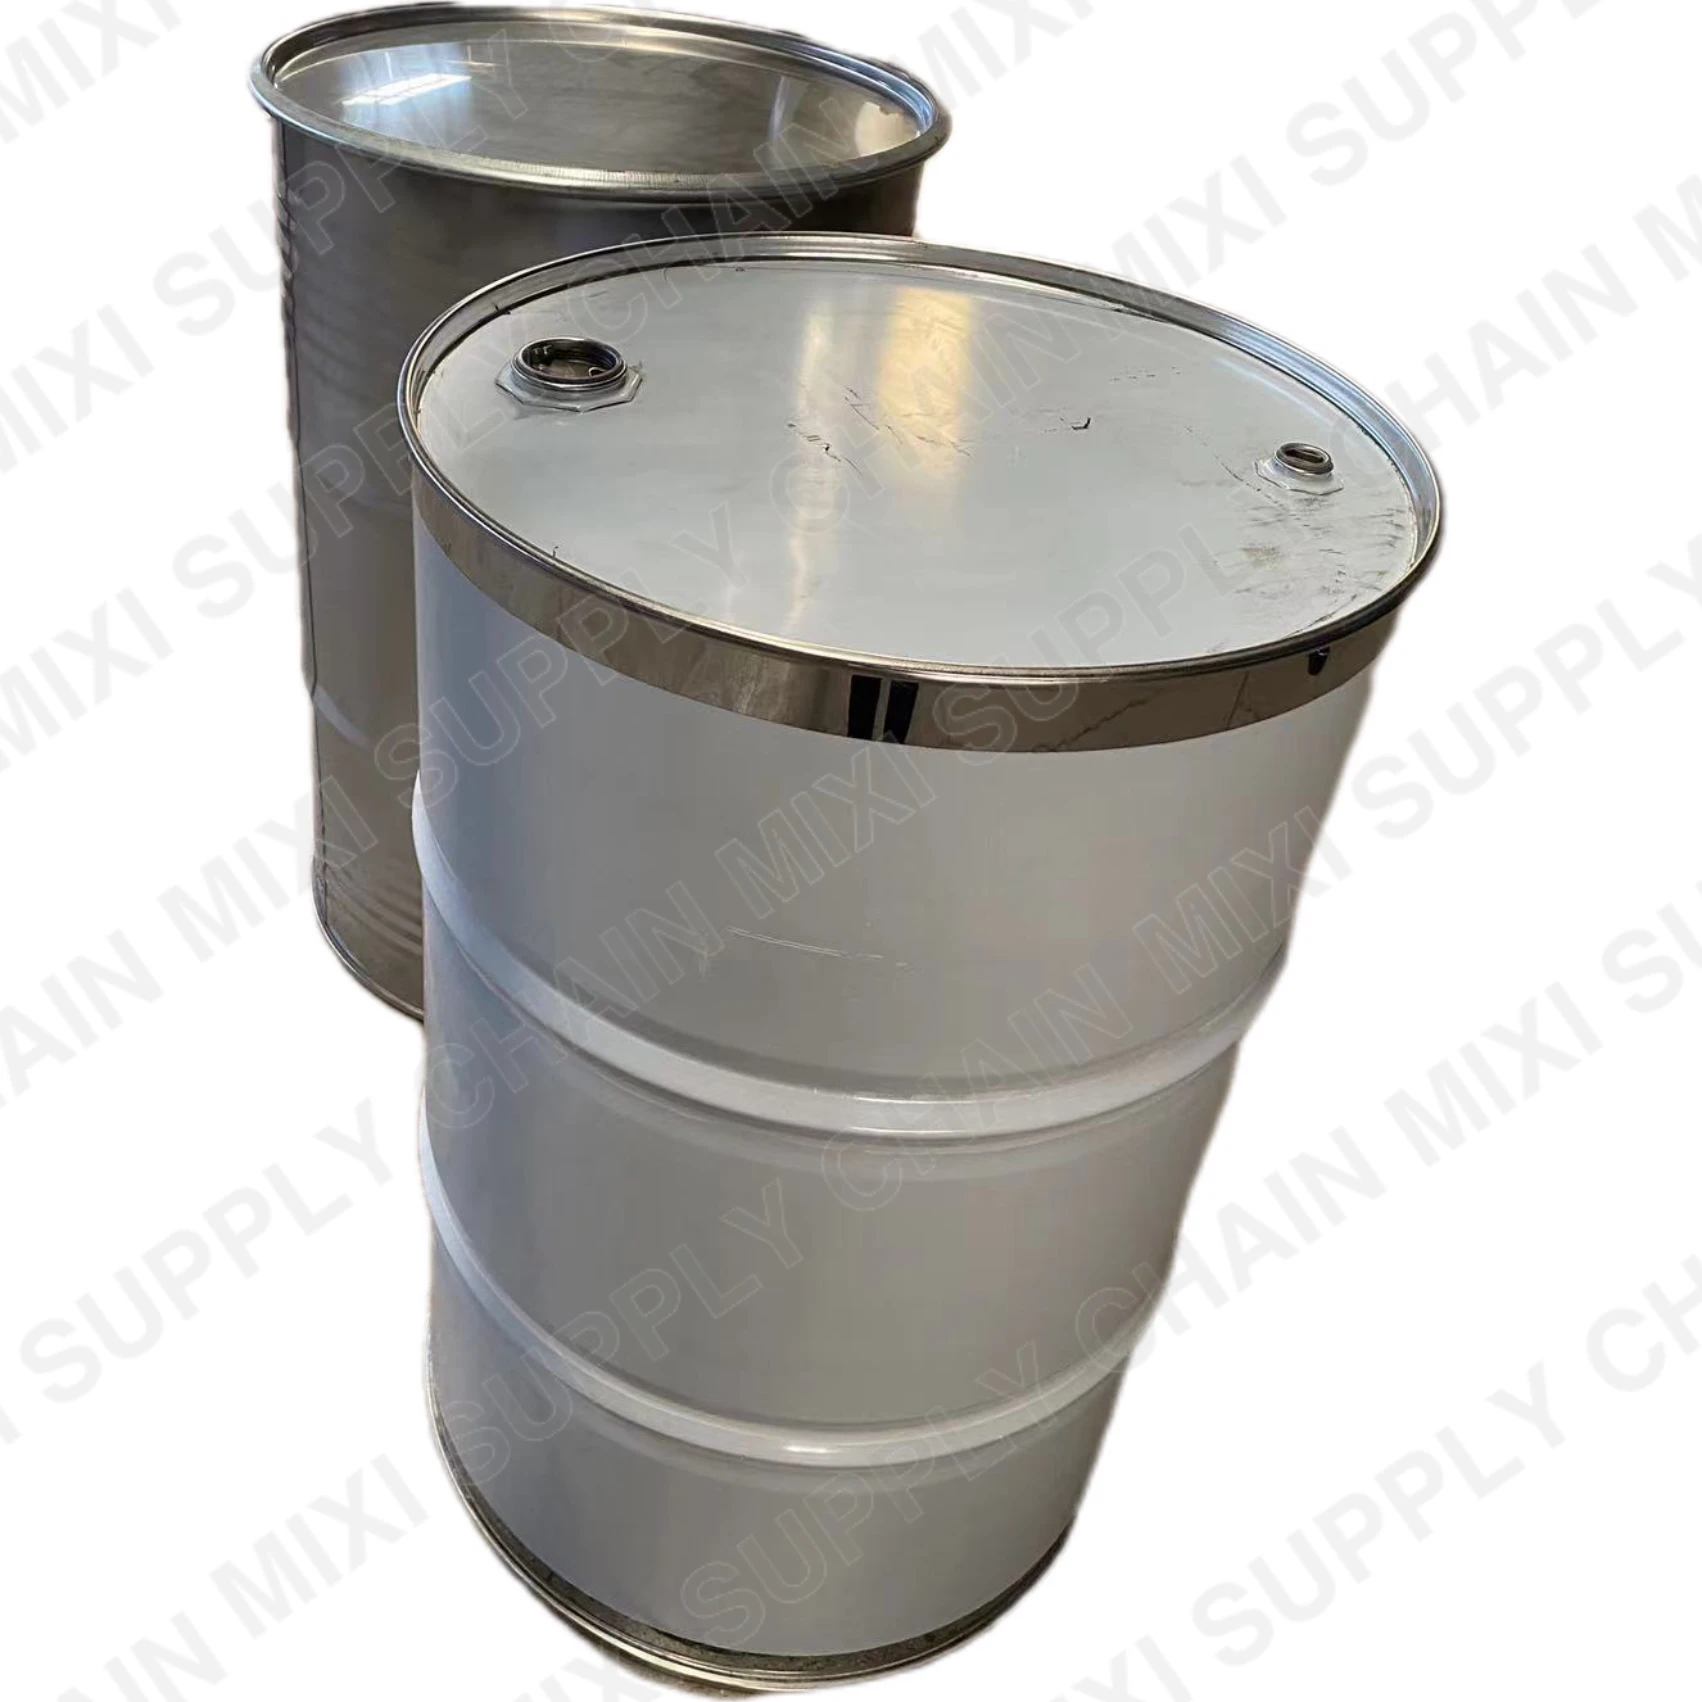 200l 210l Stainless Steel Drum Stainless Steel Barrel Buy Stainless Steel Drumstainless Steel 1334